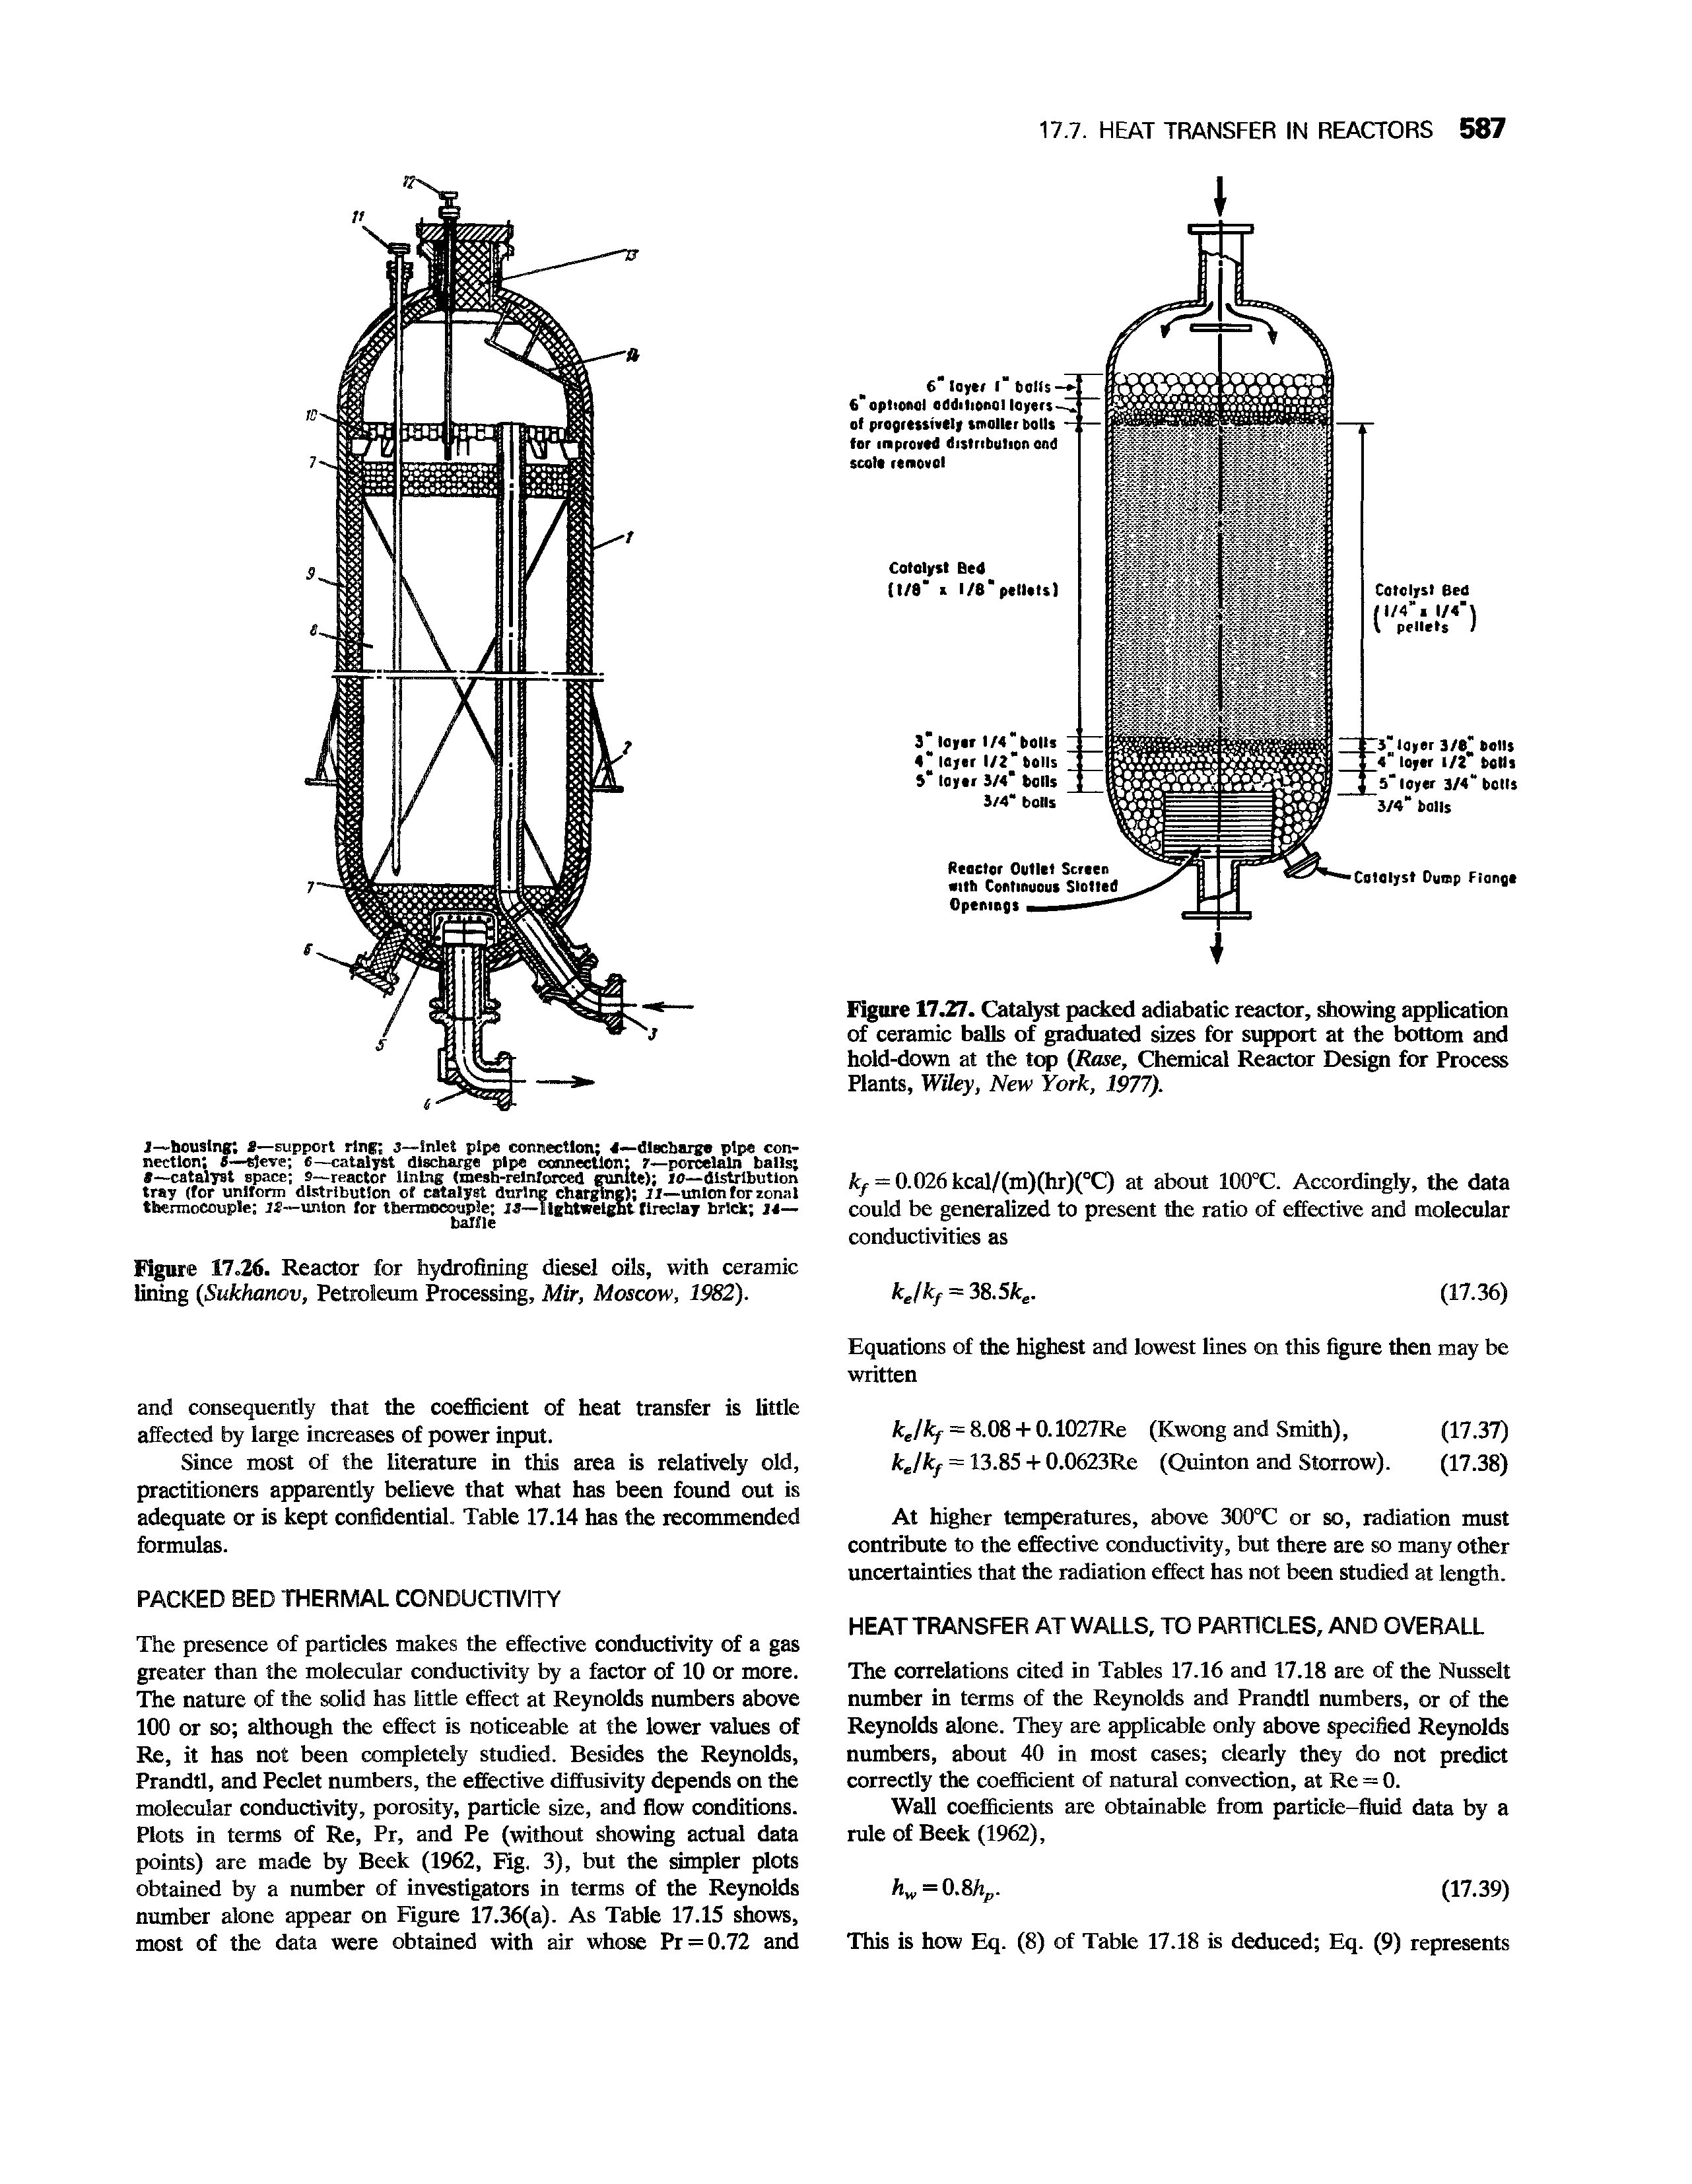 Figure 17.26. Reactor for hydrofining diesel oils, with ceramic lining (Sukhanov, Petroleum Processing, Mir, Moscow, 1982).